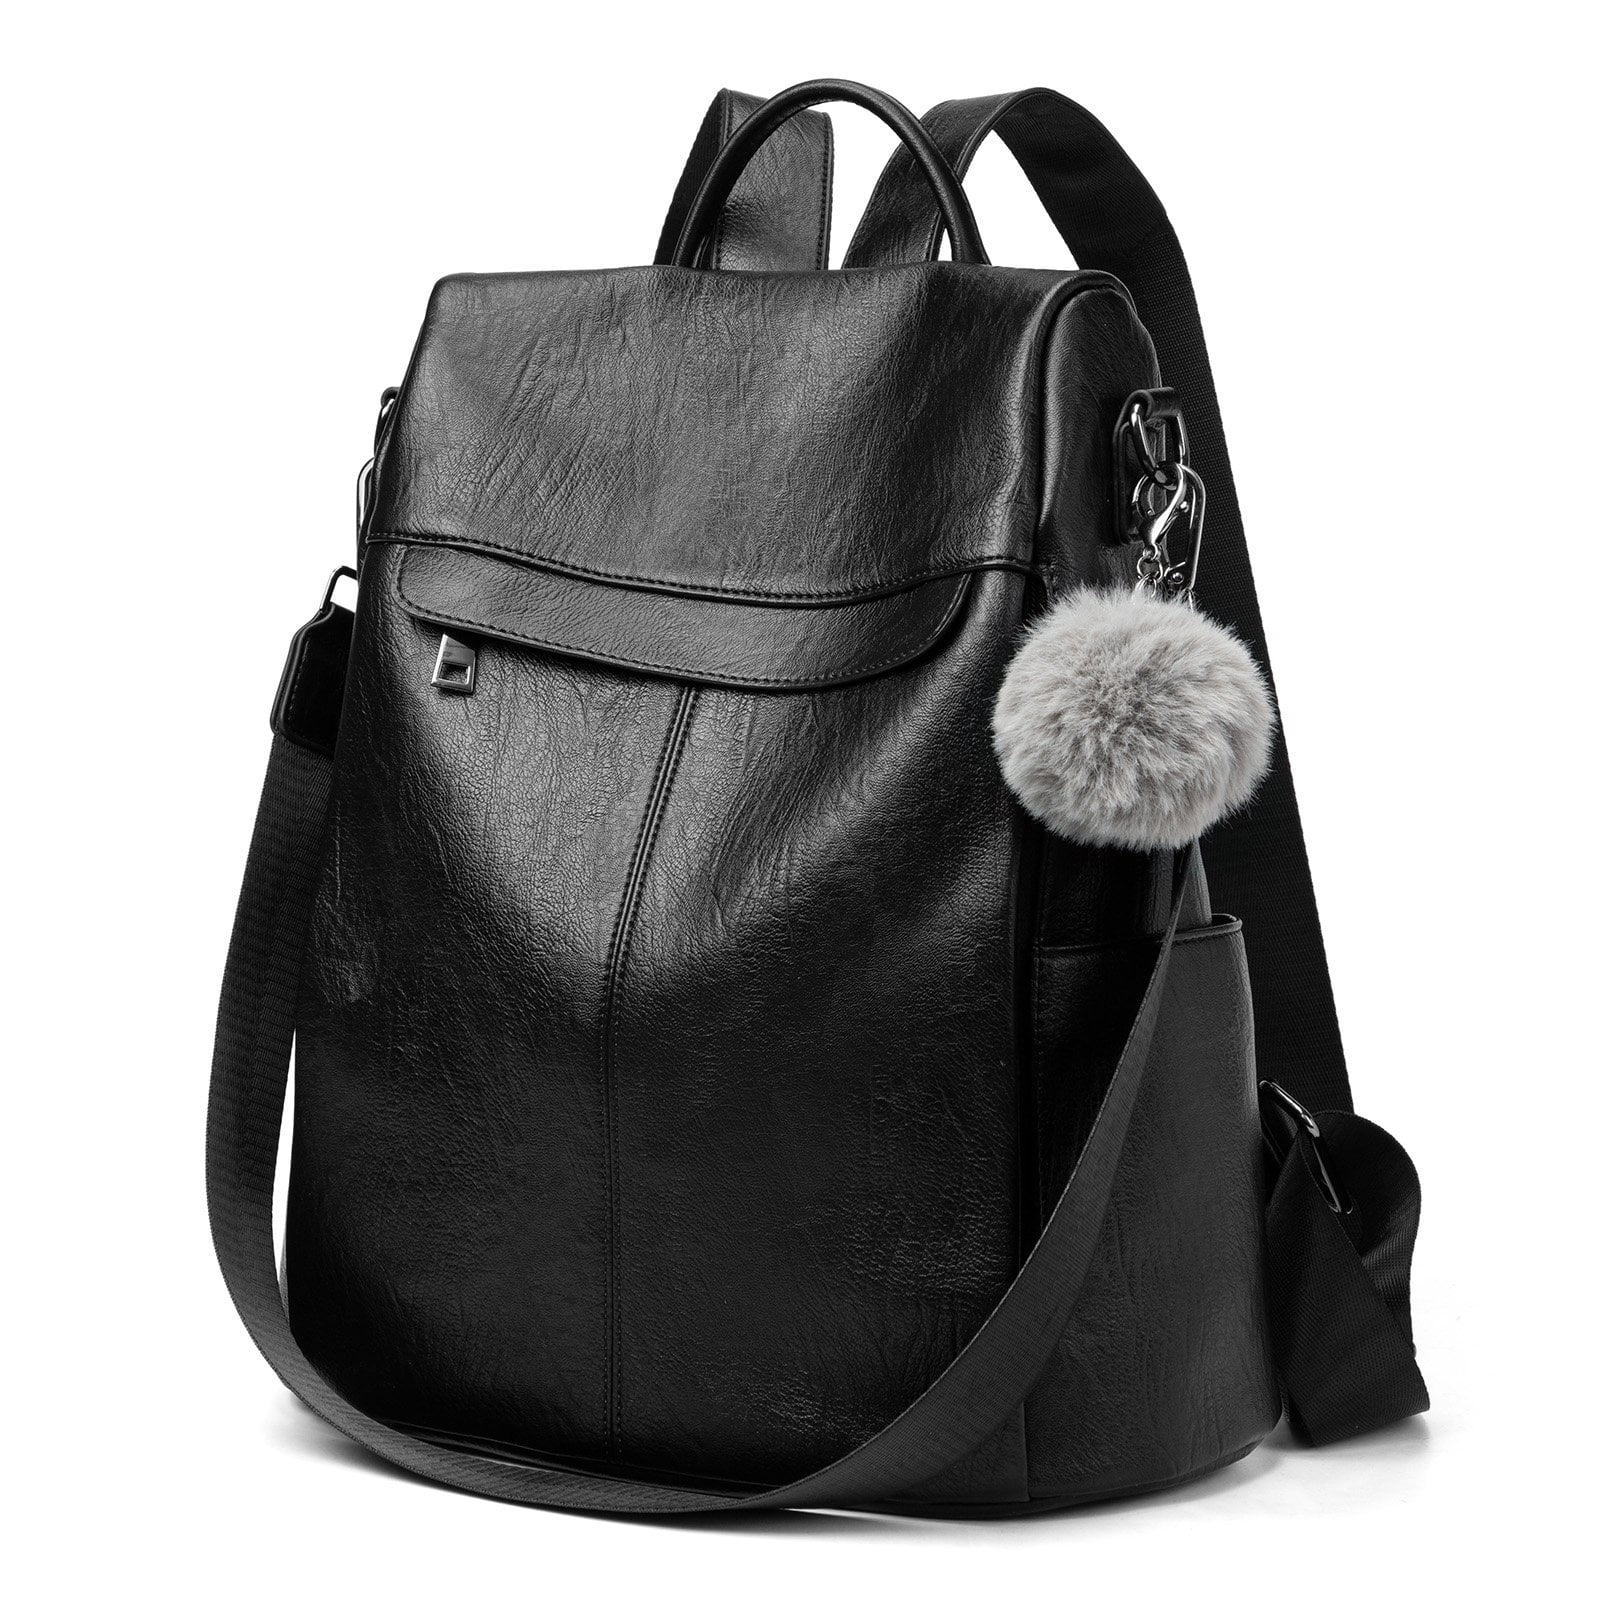 Cheruty Backpack Purse for Women Fashion Leather Backpack Designer ...